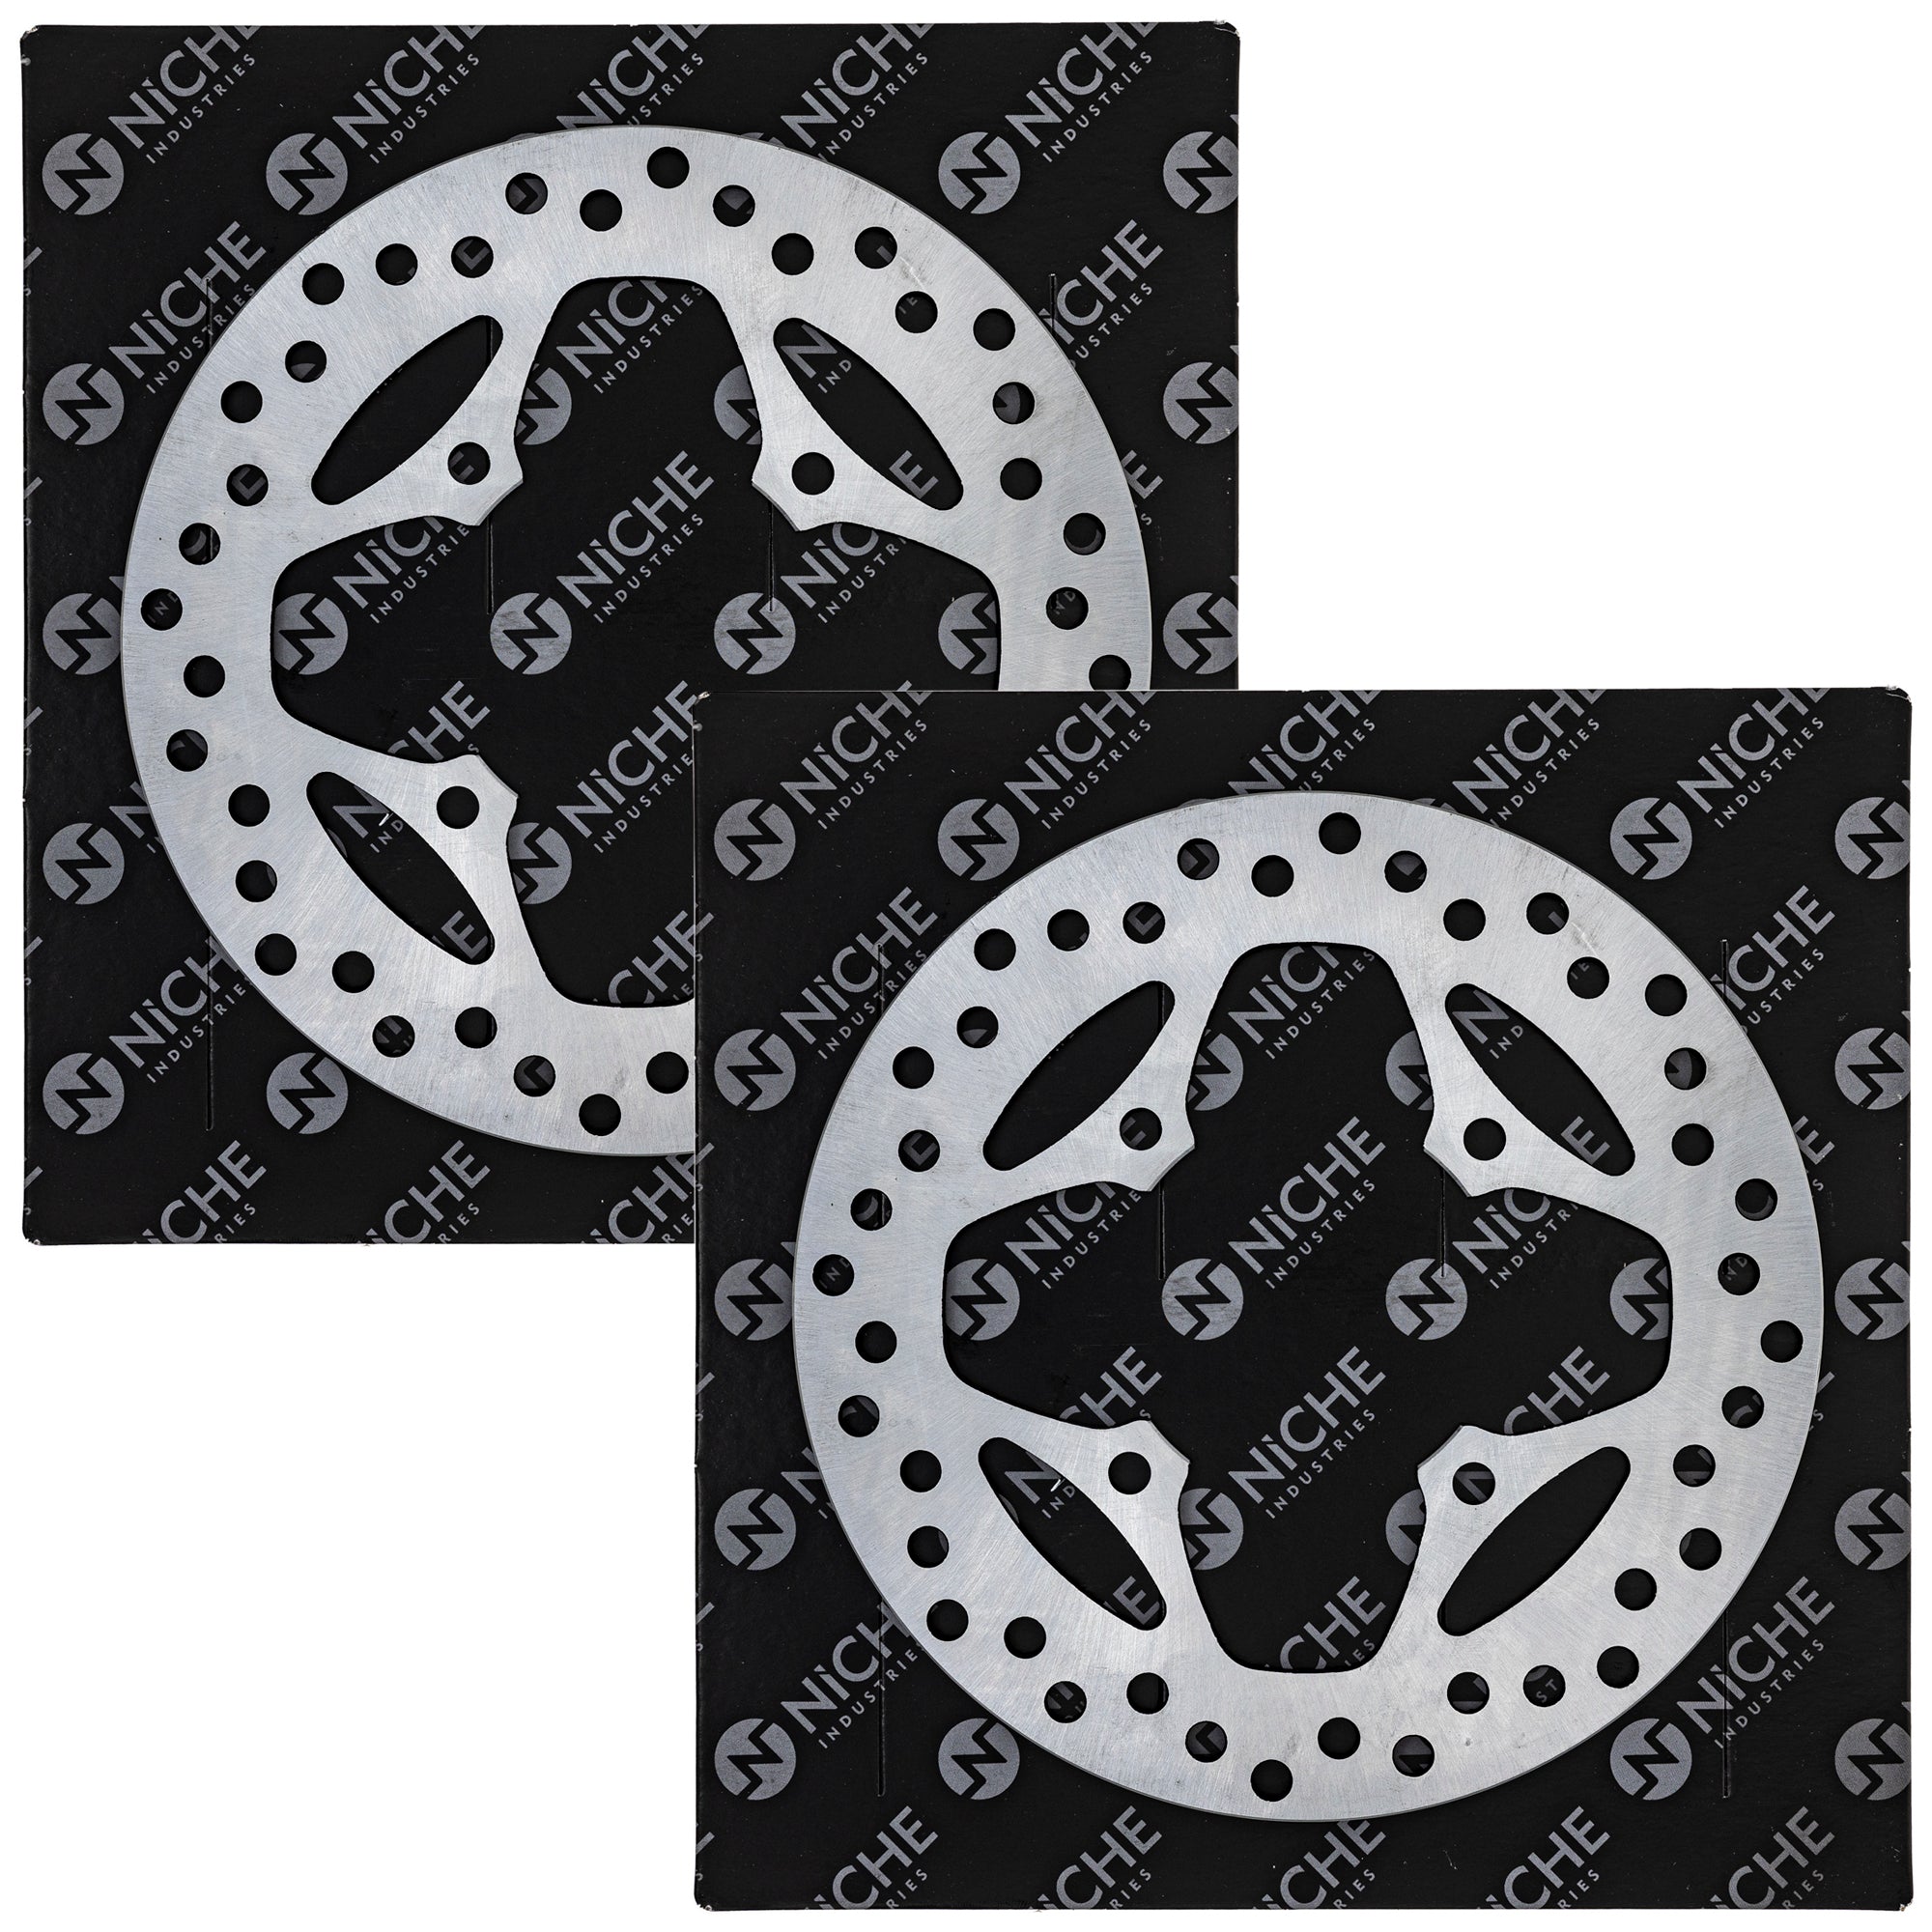 Brake Rotor Set (Front & Rear) 2-Pack for zOTHER BRP Can-Am Ski-Doo Sea-Doo Traxter Quest NICHE 519-CRT2554R